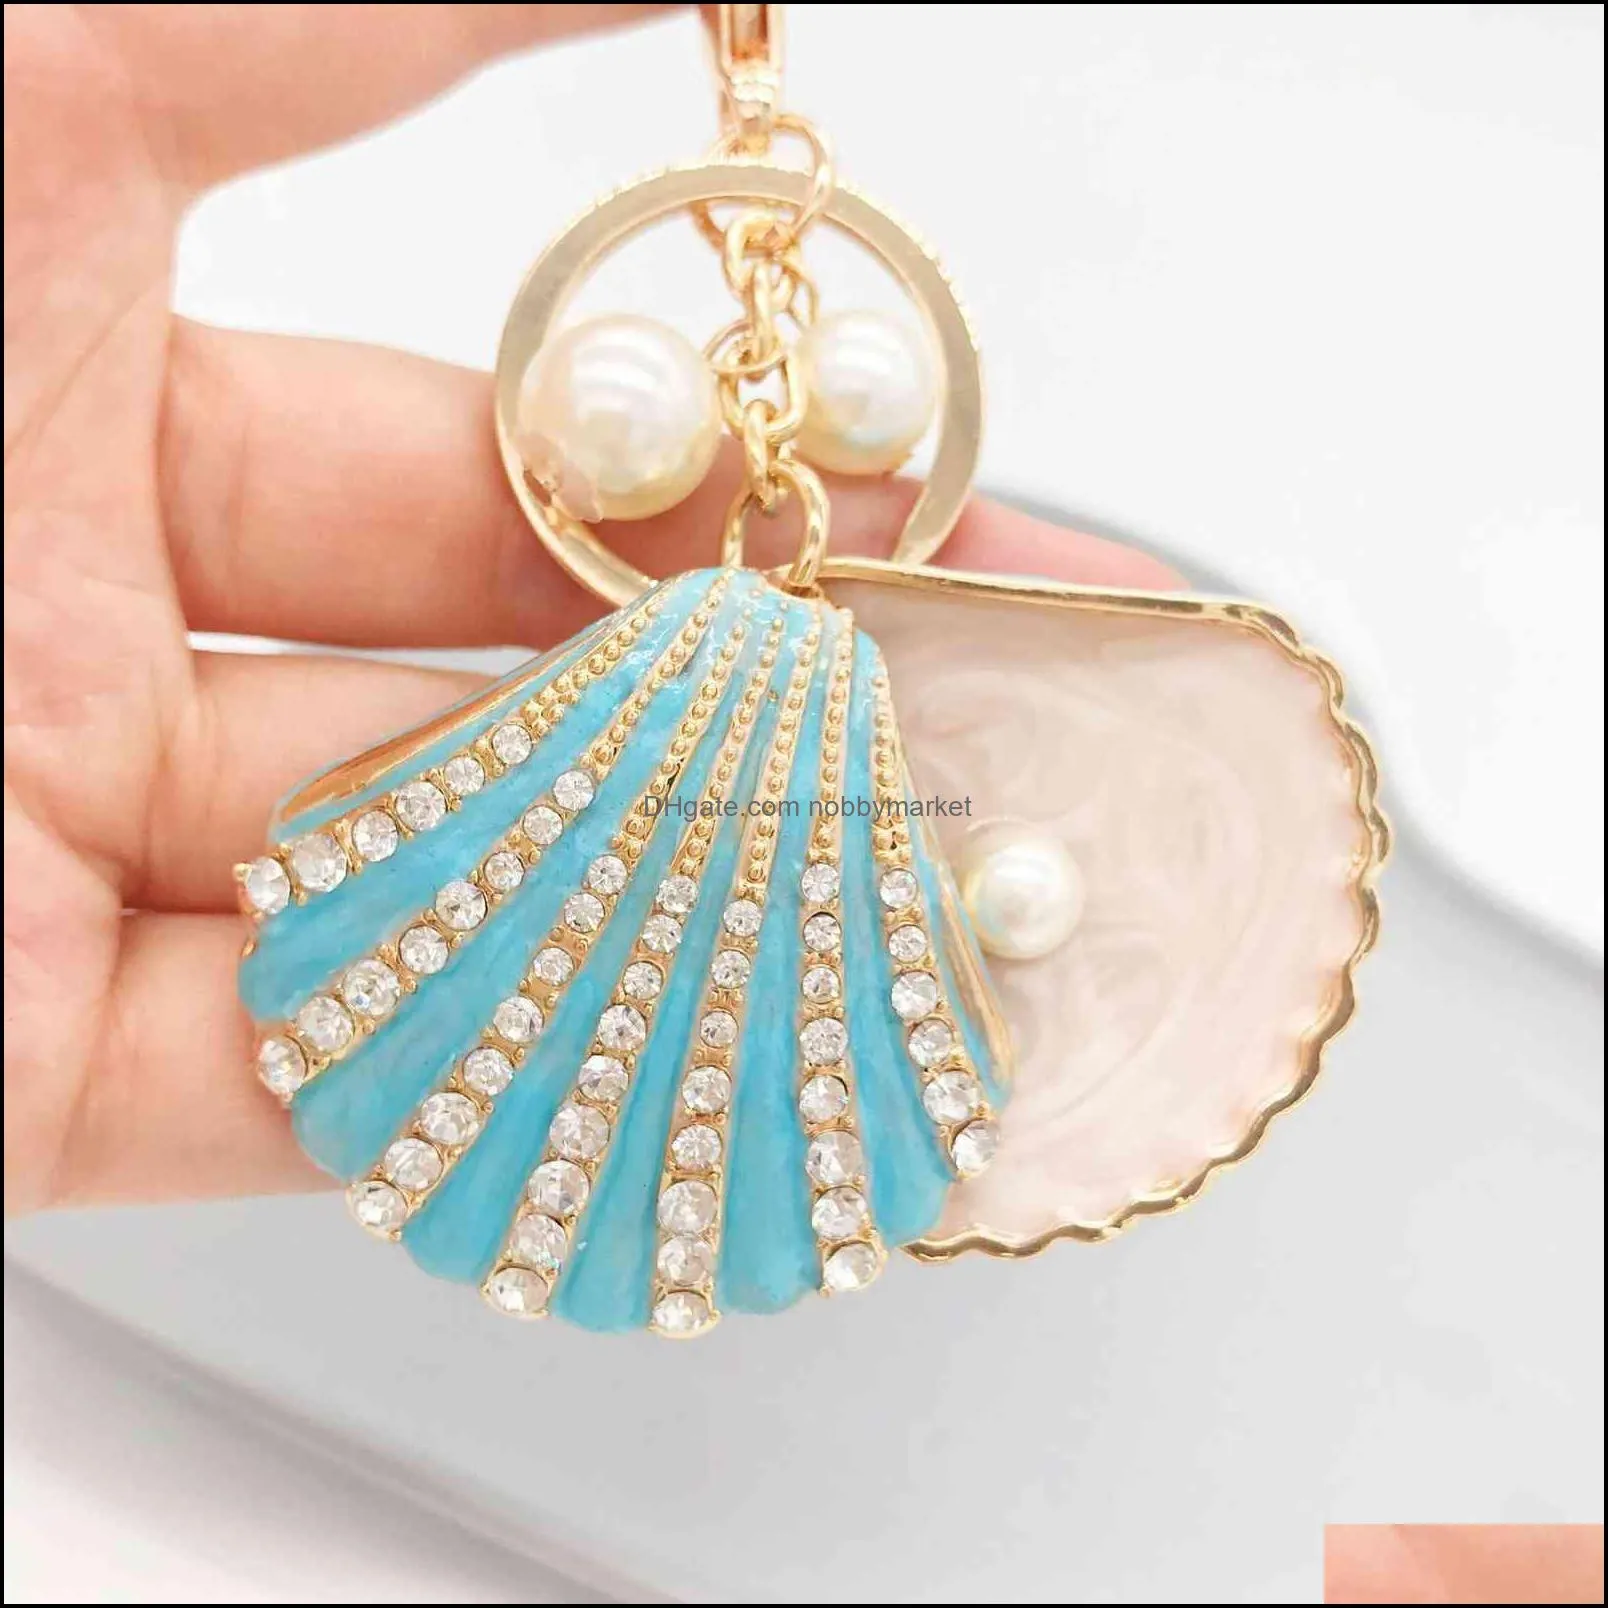 Women`s Fashion Pearl Shell Luxury Keychain or Phone Pendent Bead Adult Car Key Chain Foe Gifts